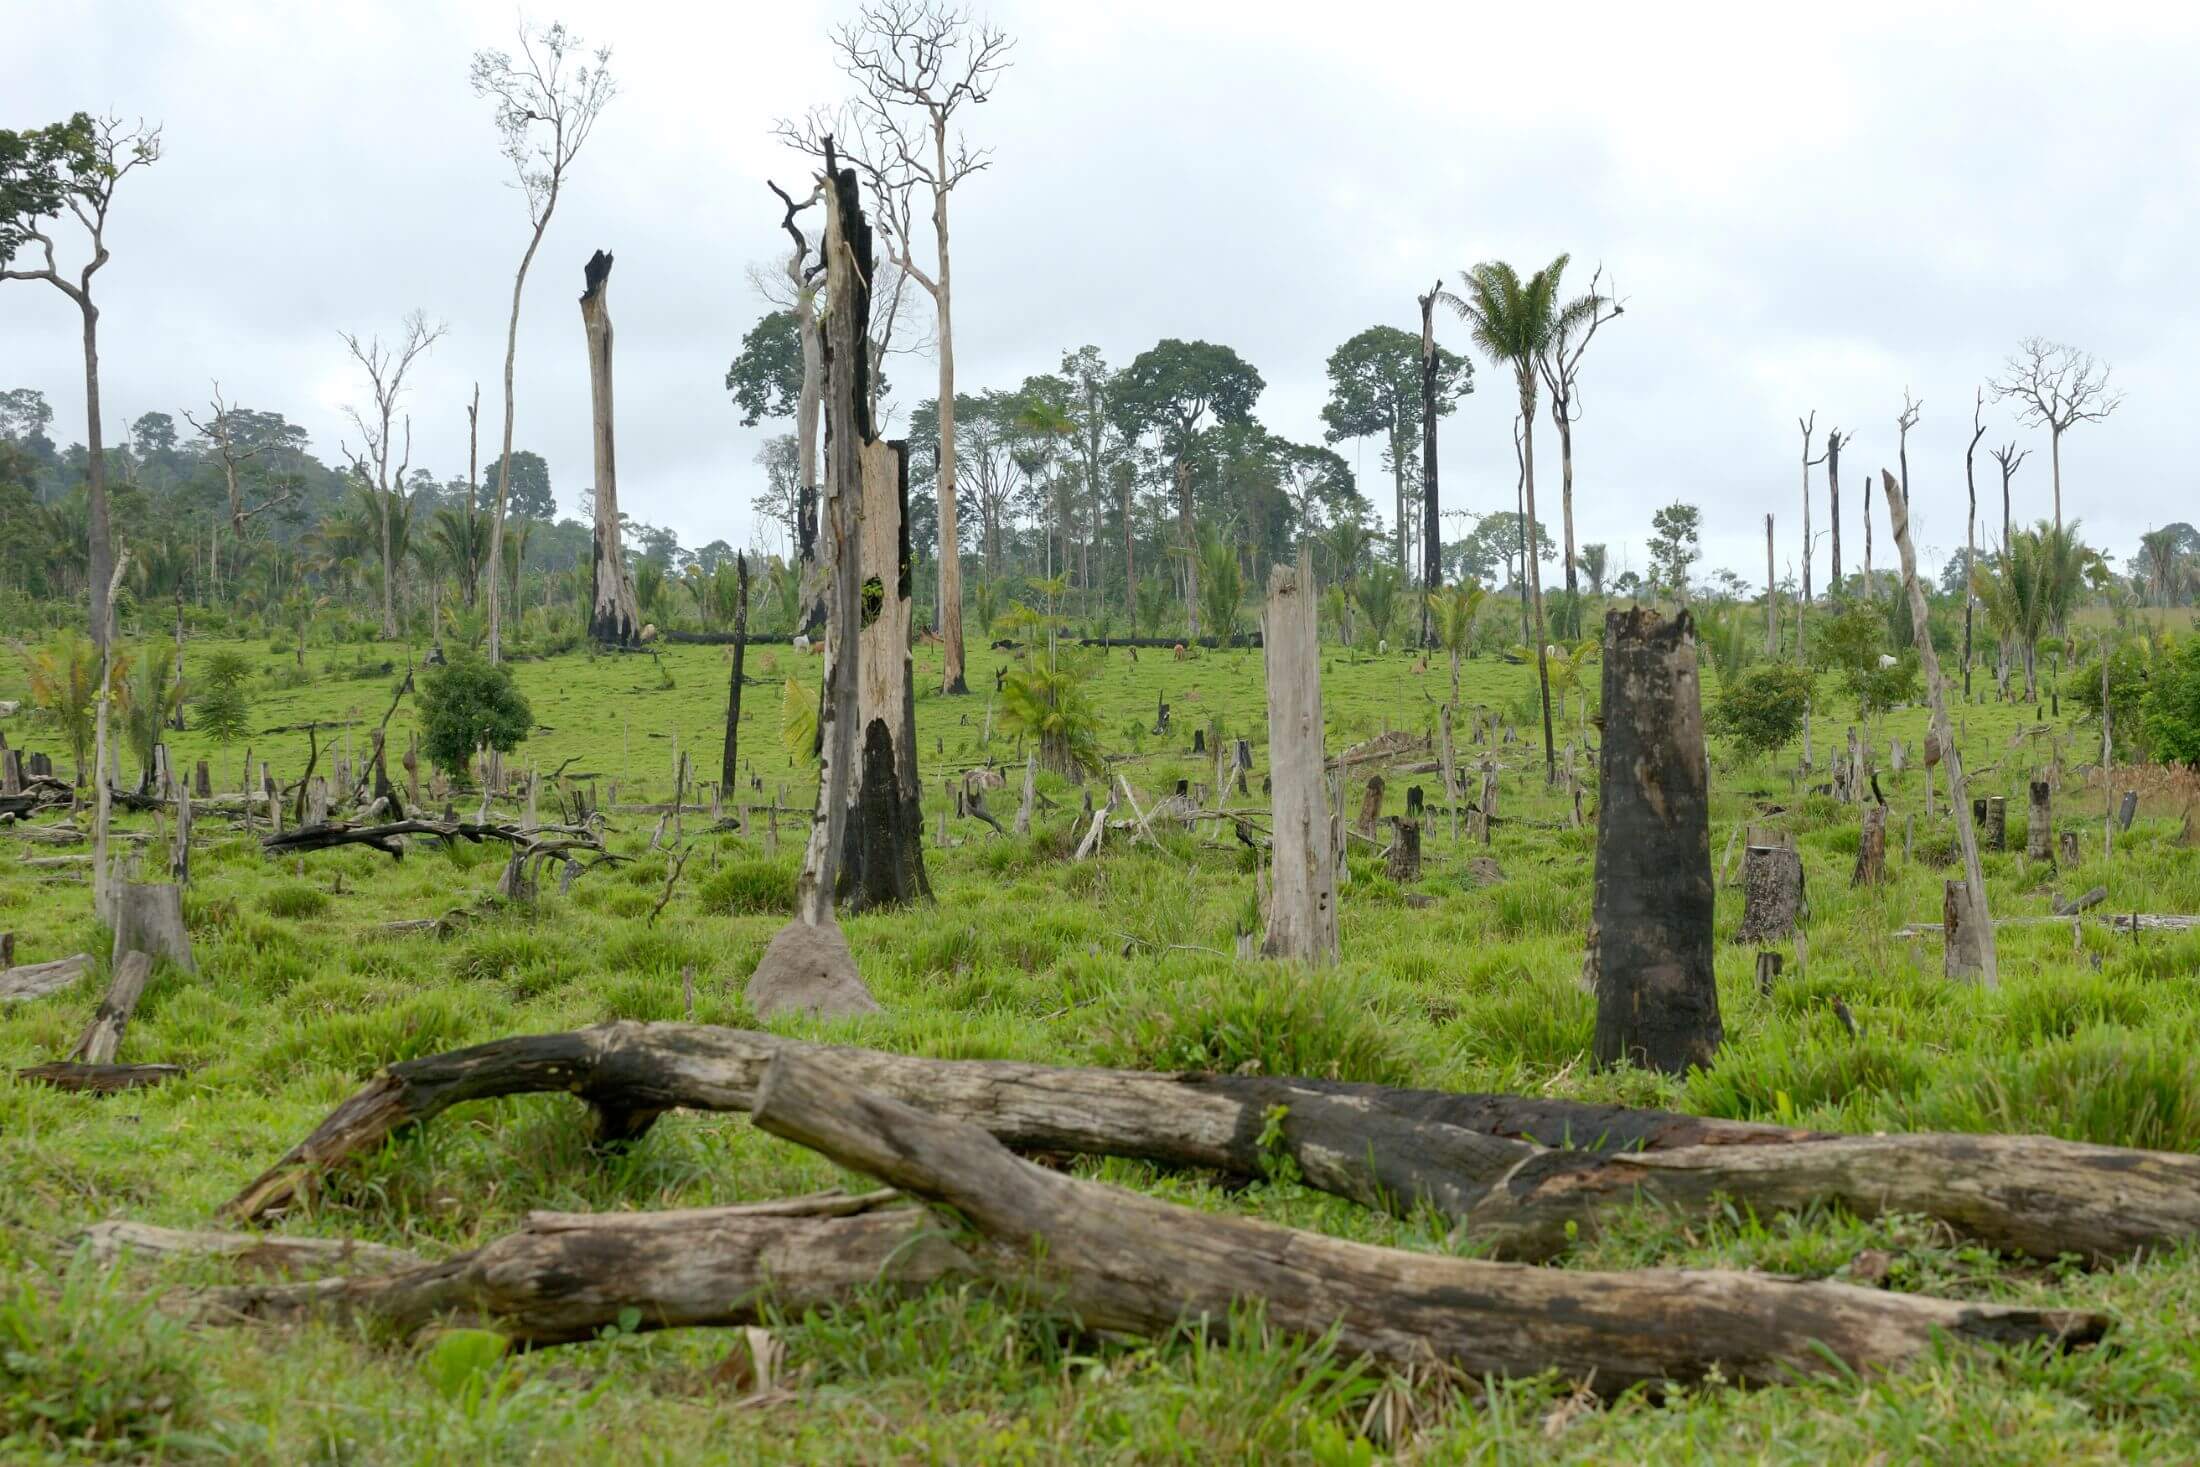 A number of burned tree trunks stand some distance apart amidst sparse vegetation. Several felled trees lie on the ground.